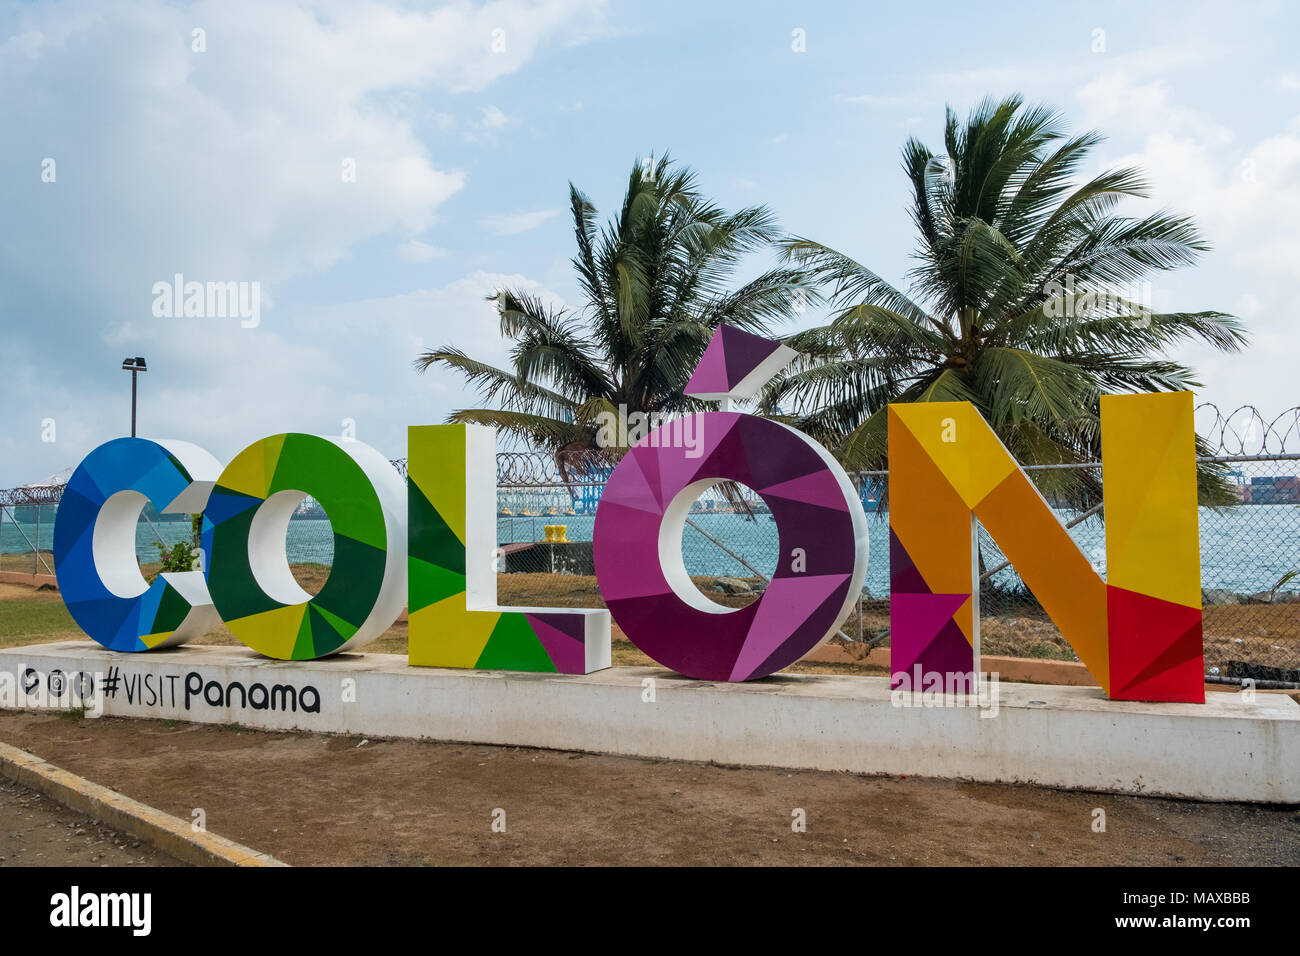 Colon, Panama - march 2018: Famous colorful name sign of the city Colo in  Panama Stock Photo